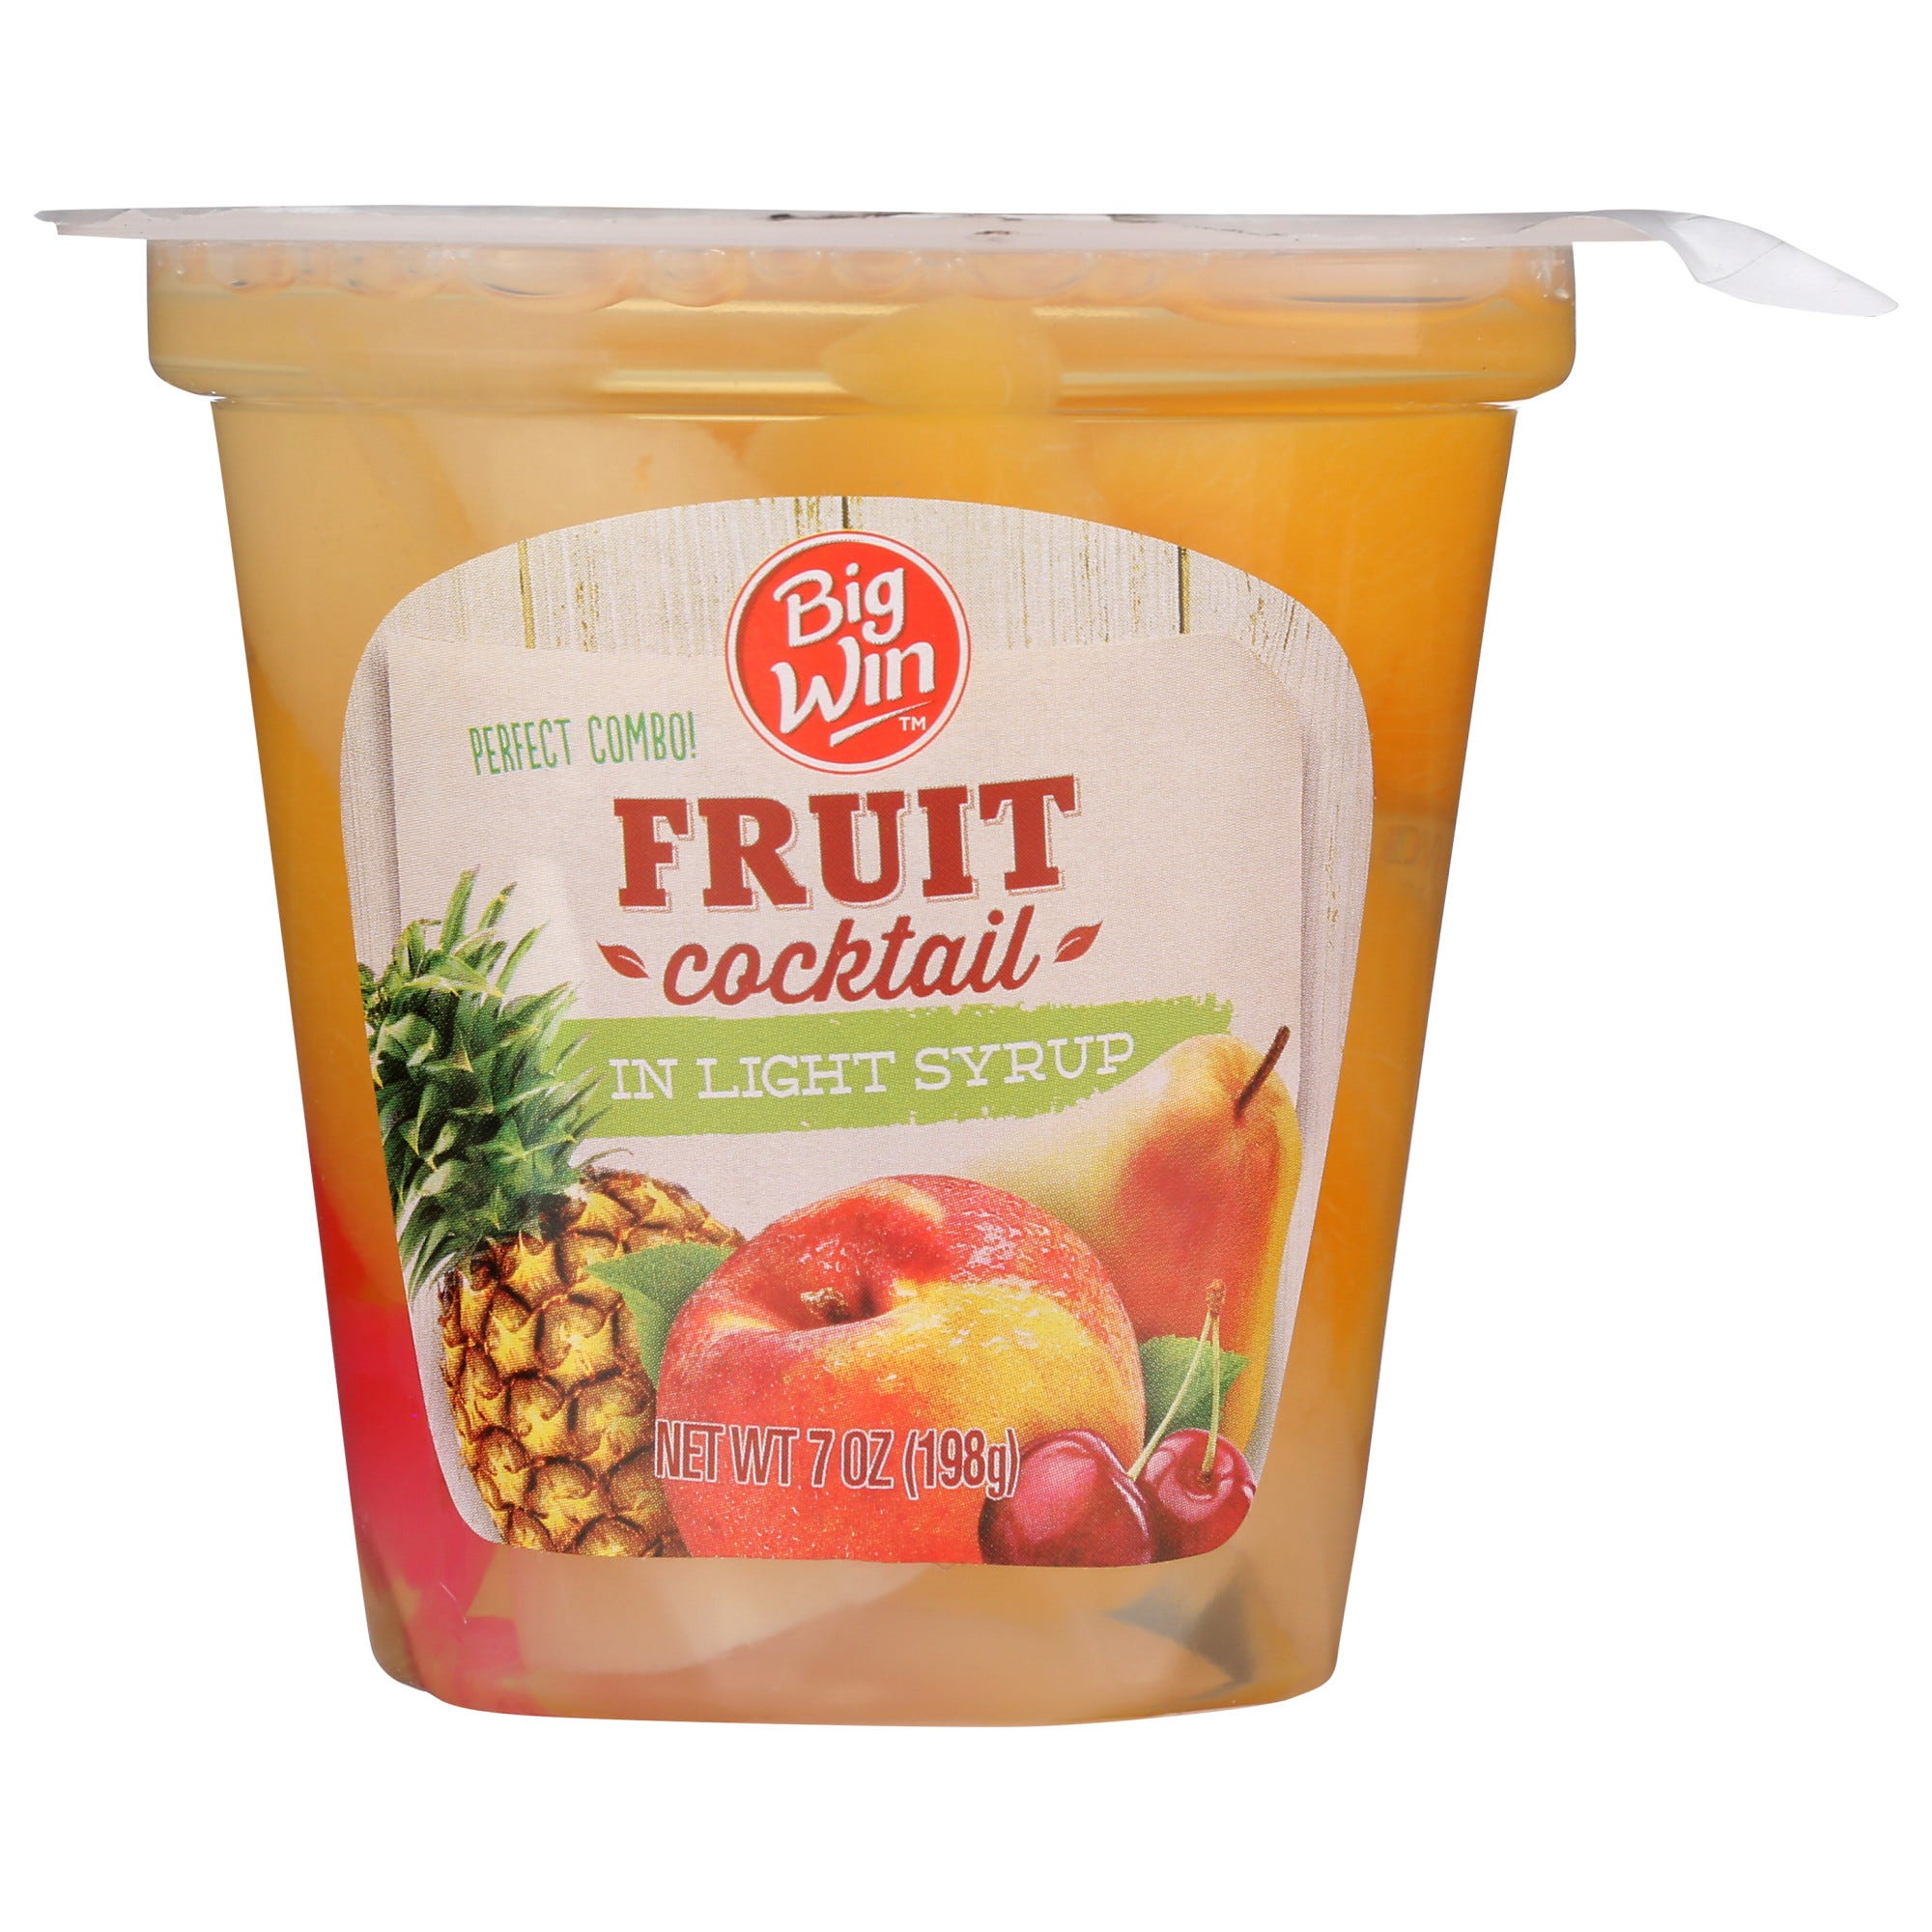 Big Win Fruit Cocktail in Light Syrup, 7 oz